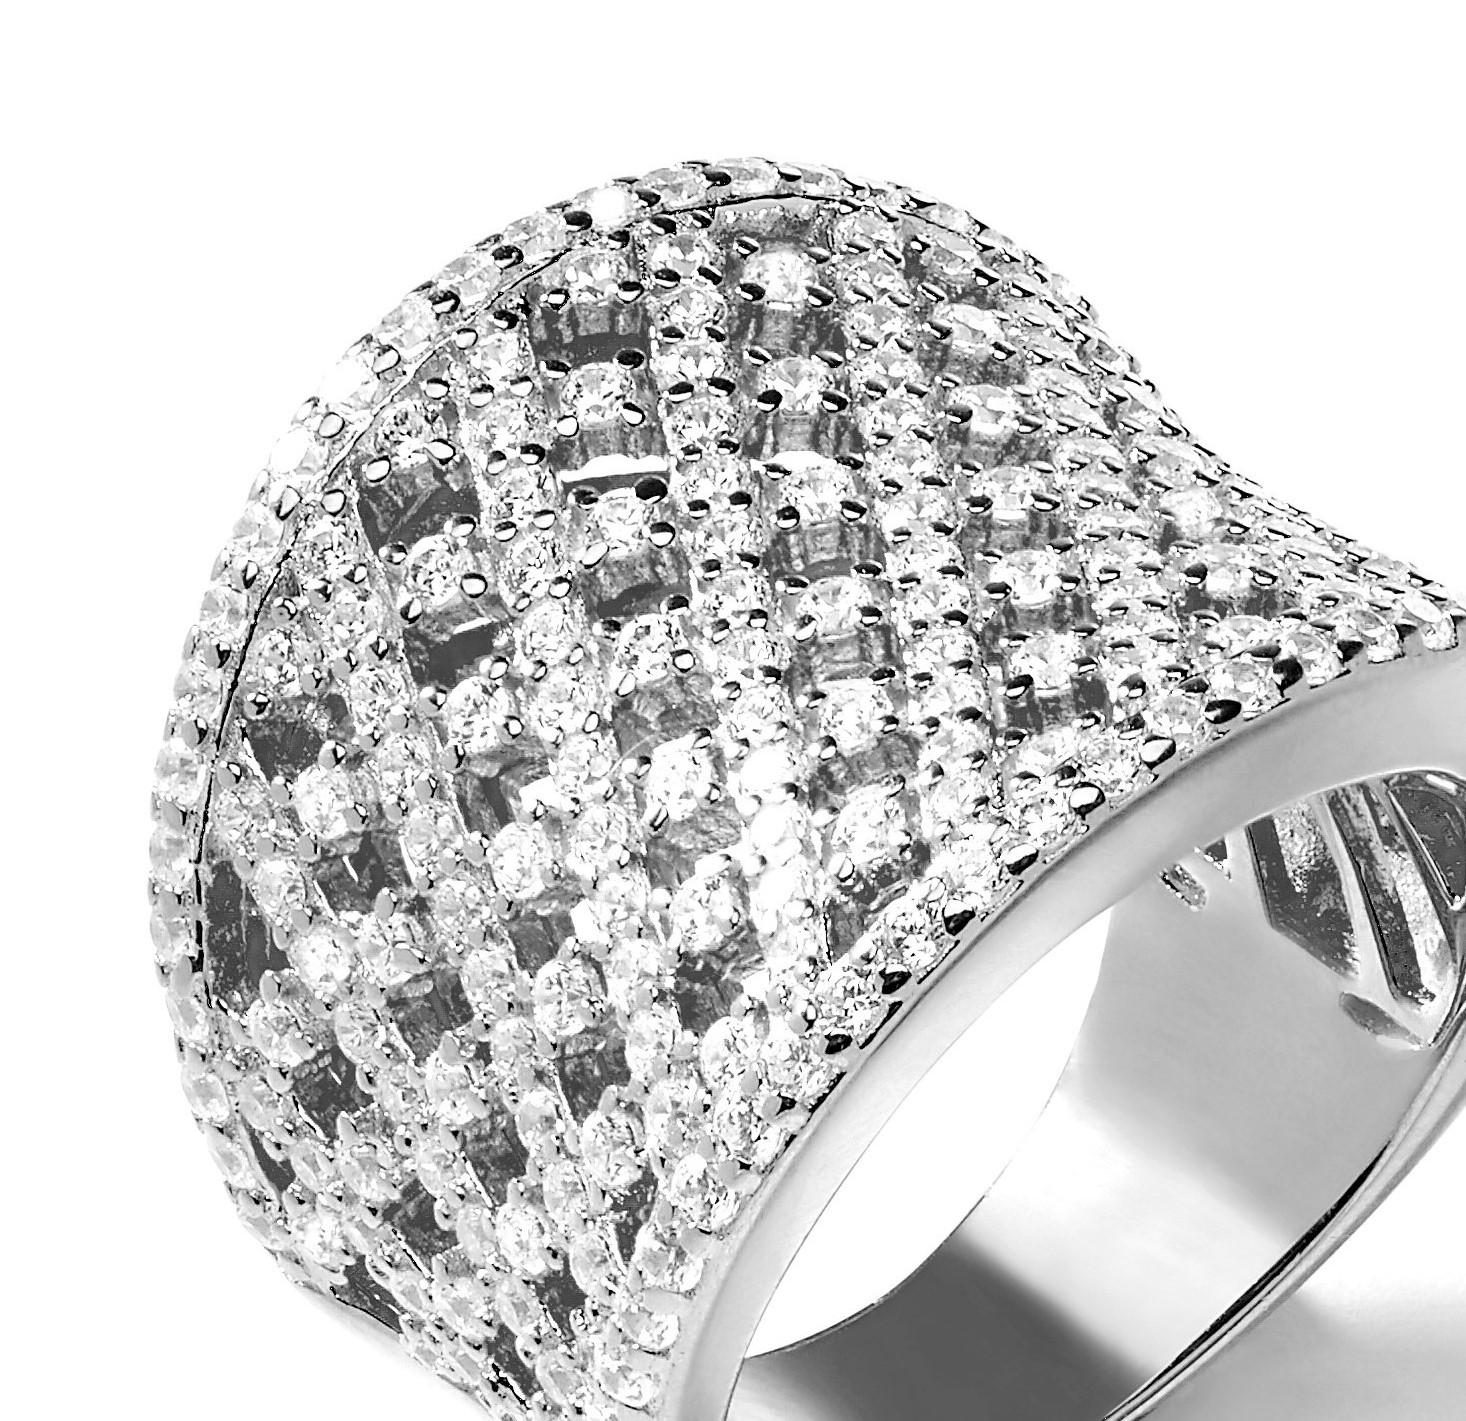 This bold, intricately designed lattice cut band ring is guaranteed to attract admiring glances. 

3.50ct round brilliant cut cubic zirconia embellish this beautiful and unusual concave design statement piece. 

Composed of 925 sterling silver with